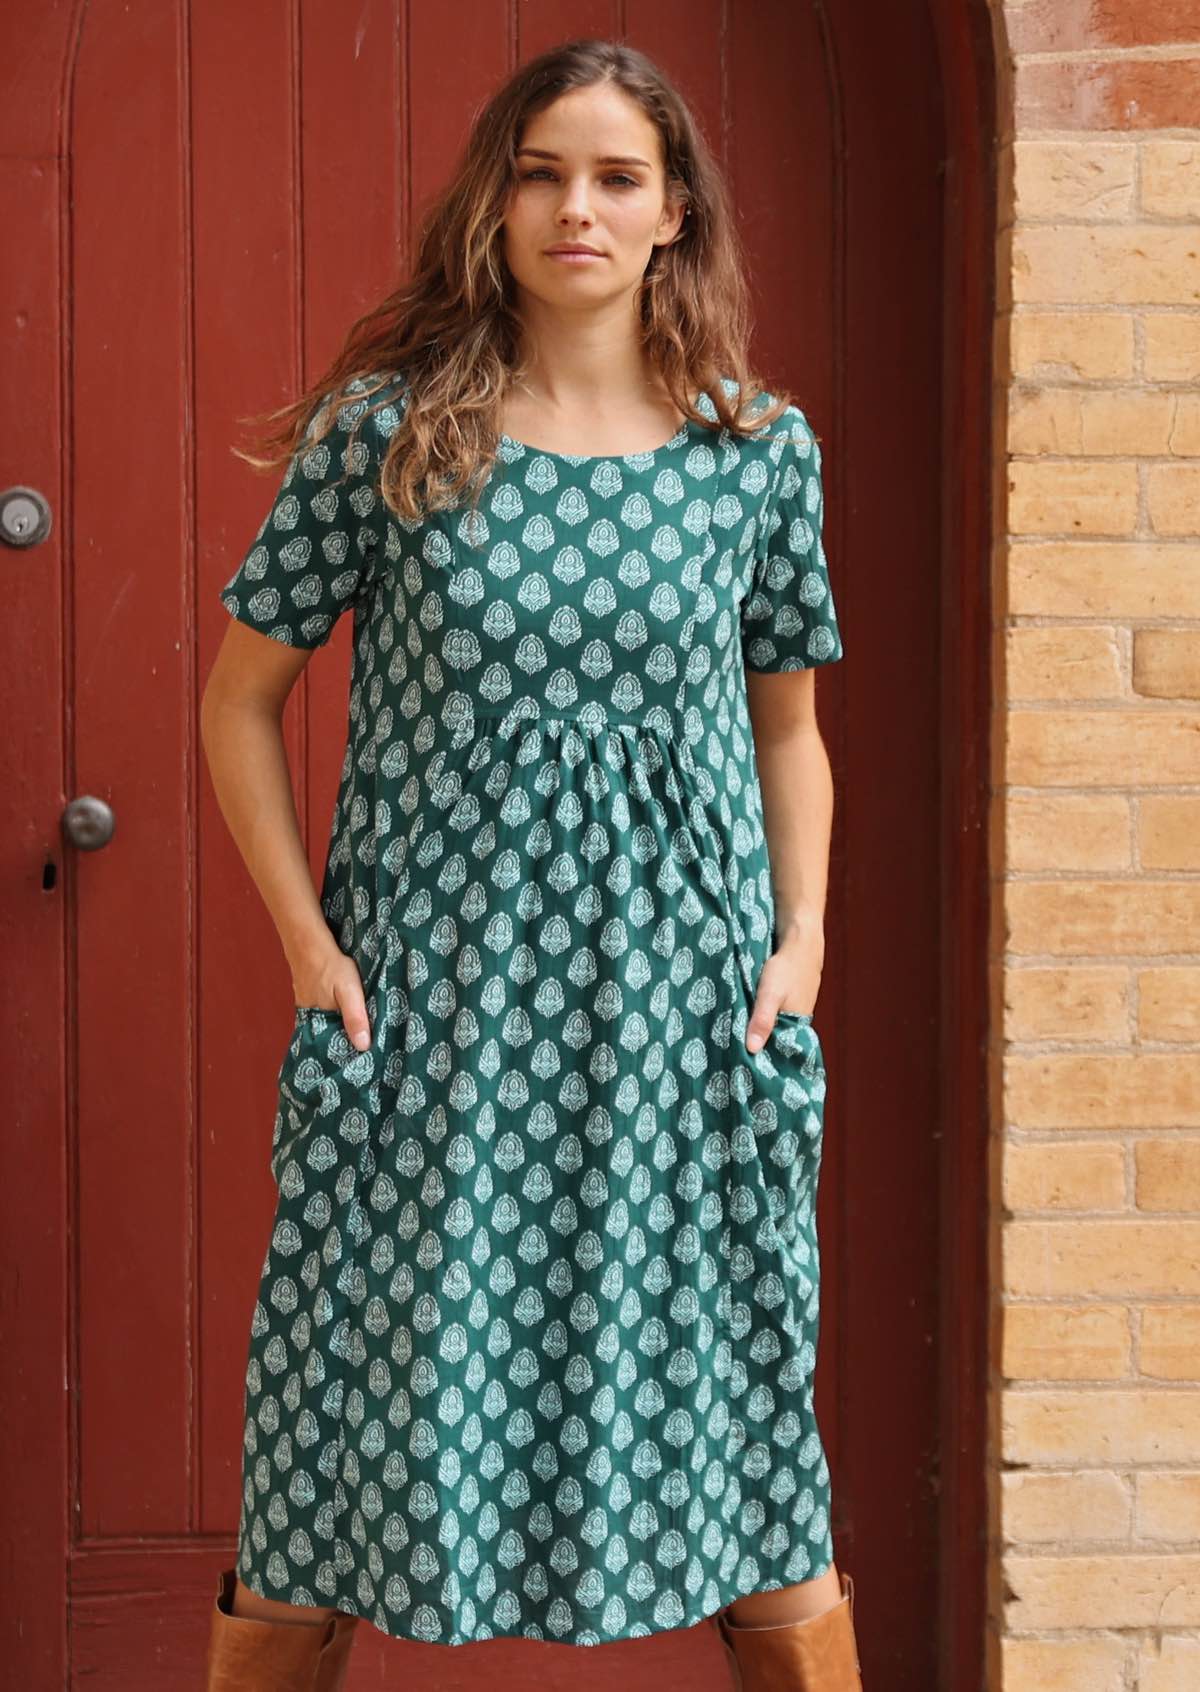 T-shirt sleeved cotton dress with white pendant print on dark green base